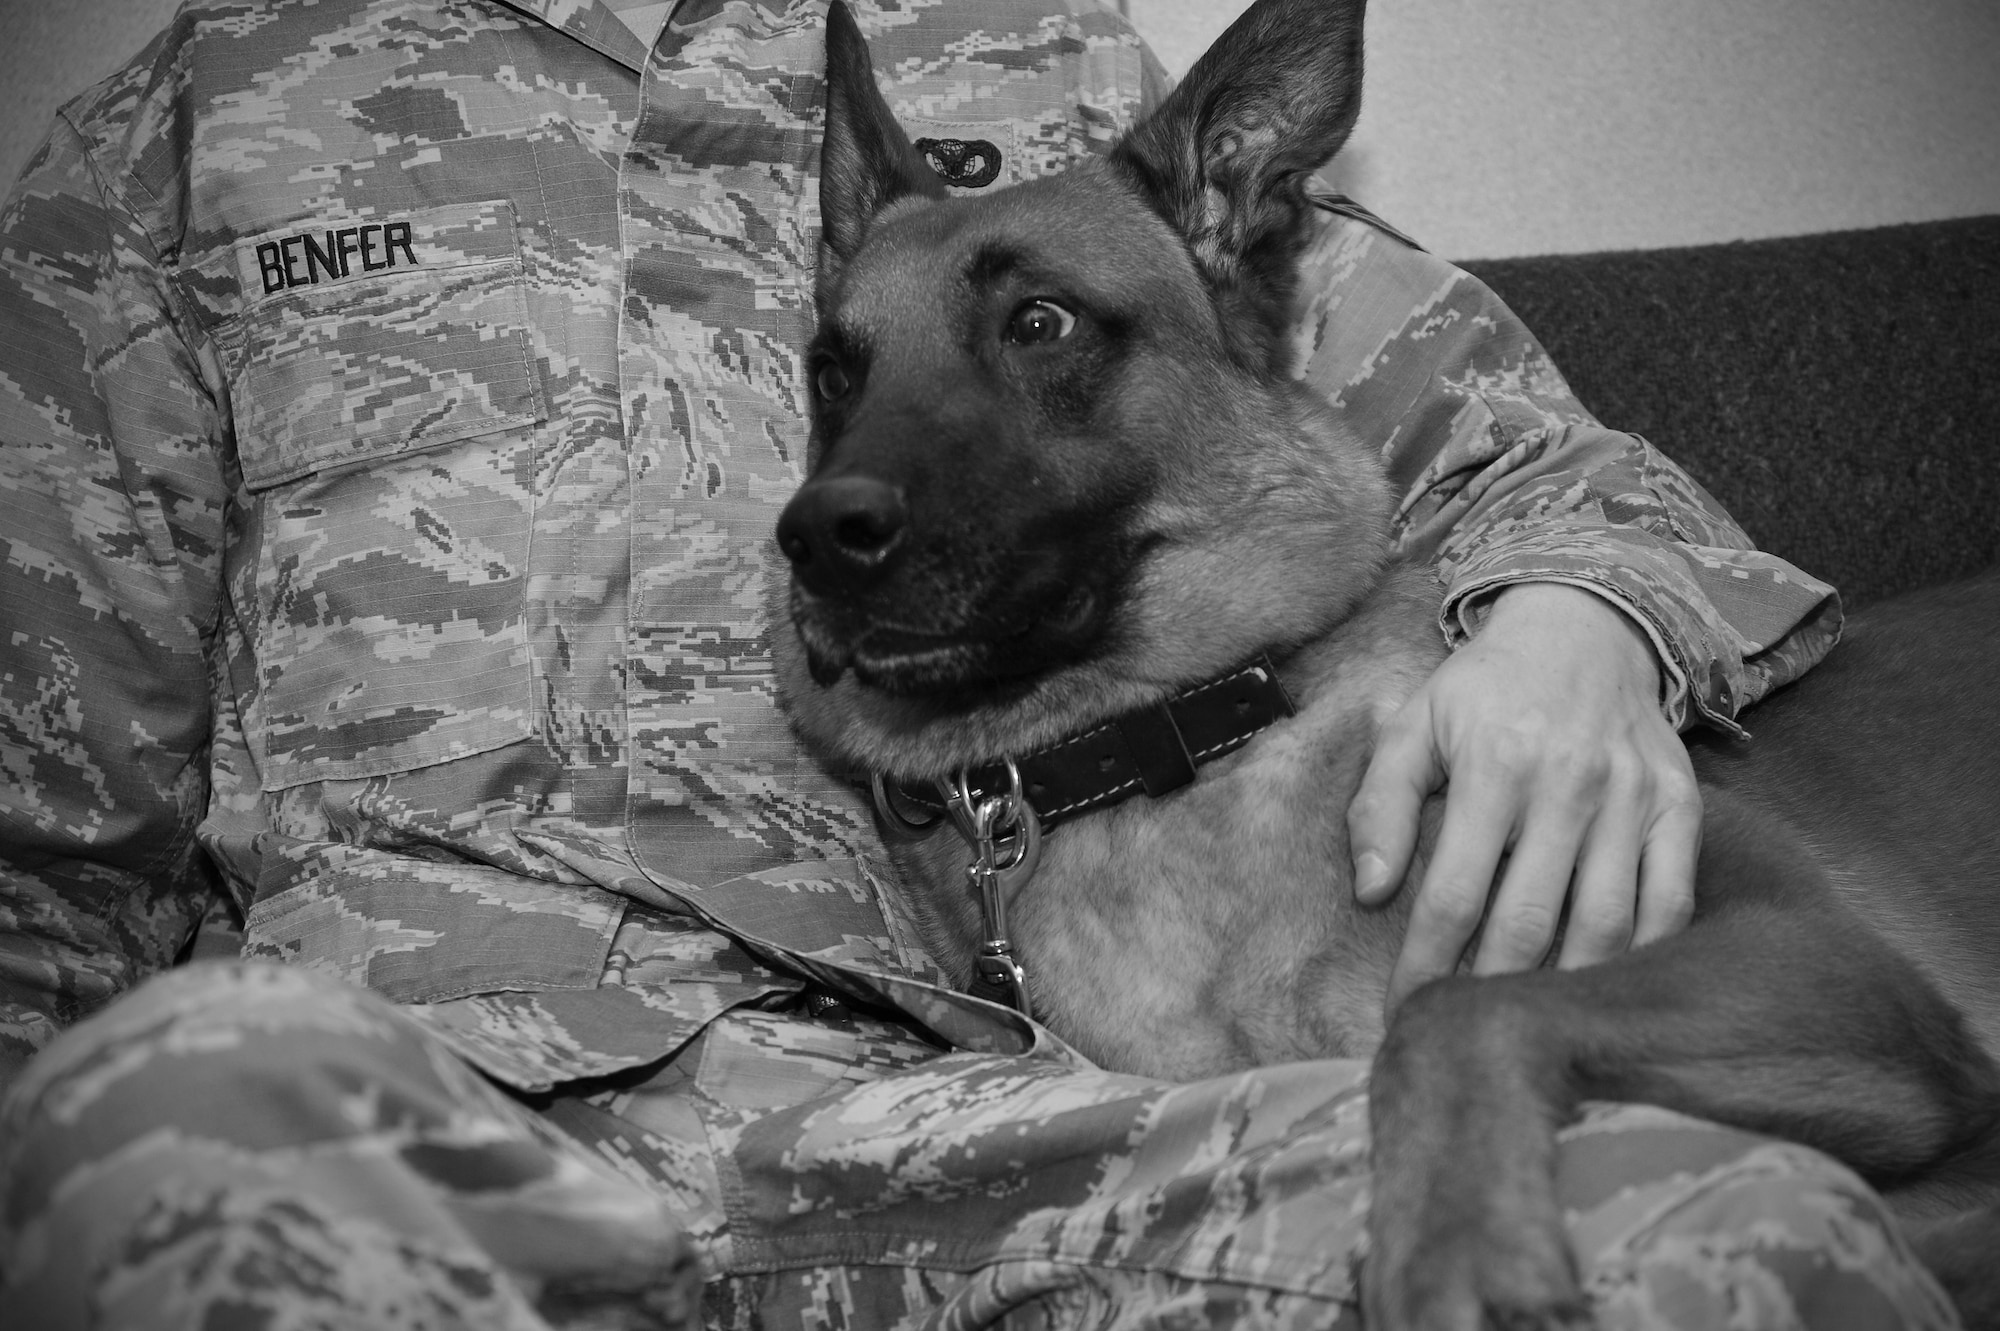 Uutah relaxes with a handler after a day of training at Fairchild Air Force Base, Wash., March 21, 2013. A few of the training exercises the dogs go through include bite work, confidence building and odor detection. Uutah is a Belgian Malinois military working dog assigned to the 92nd Security Forces Squadron. (U.S. Air Force photo by Senior Airman Taylor Curry)